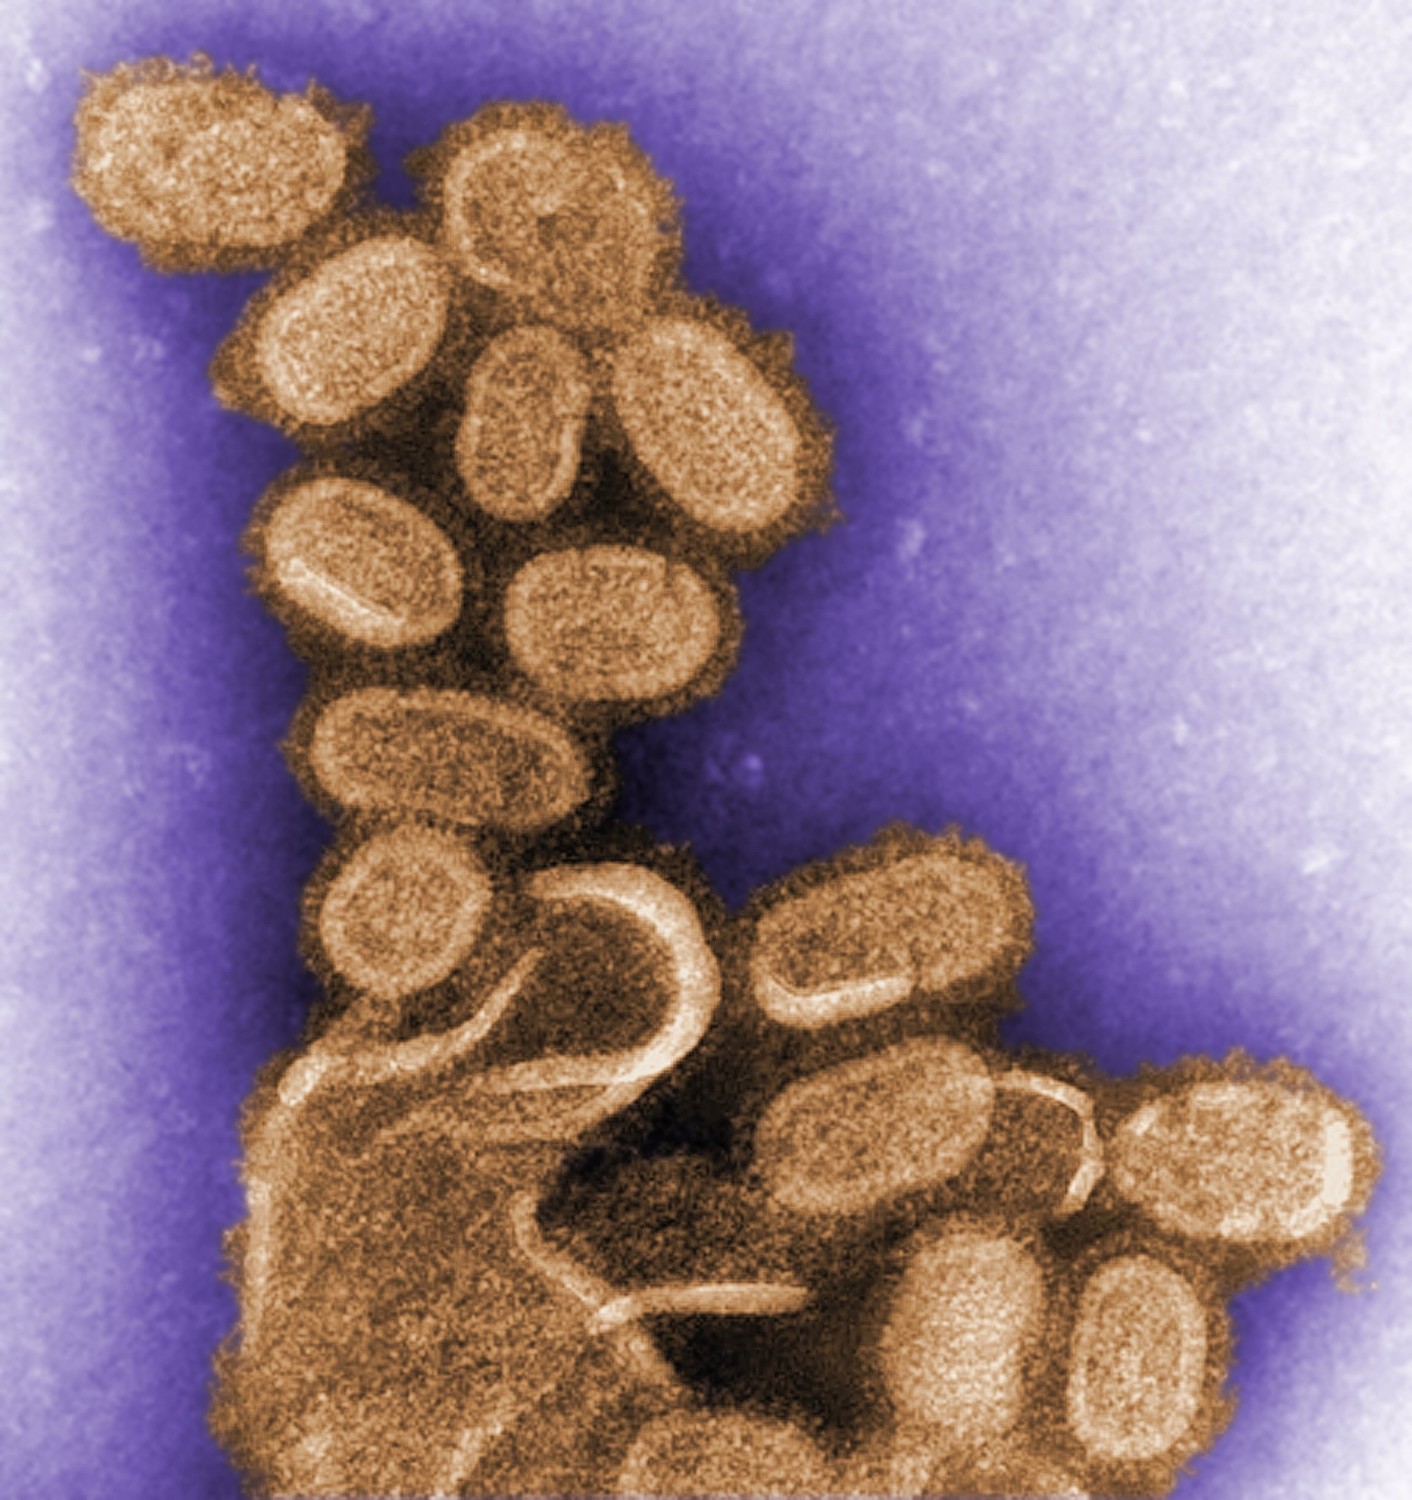 a microscope image of oval shaped viruses digitally colored in gold, bursting out of cell debris, also in gold. the background is digitally colored purple